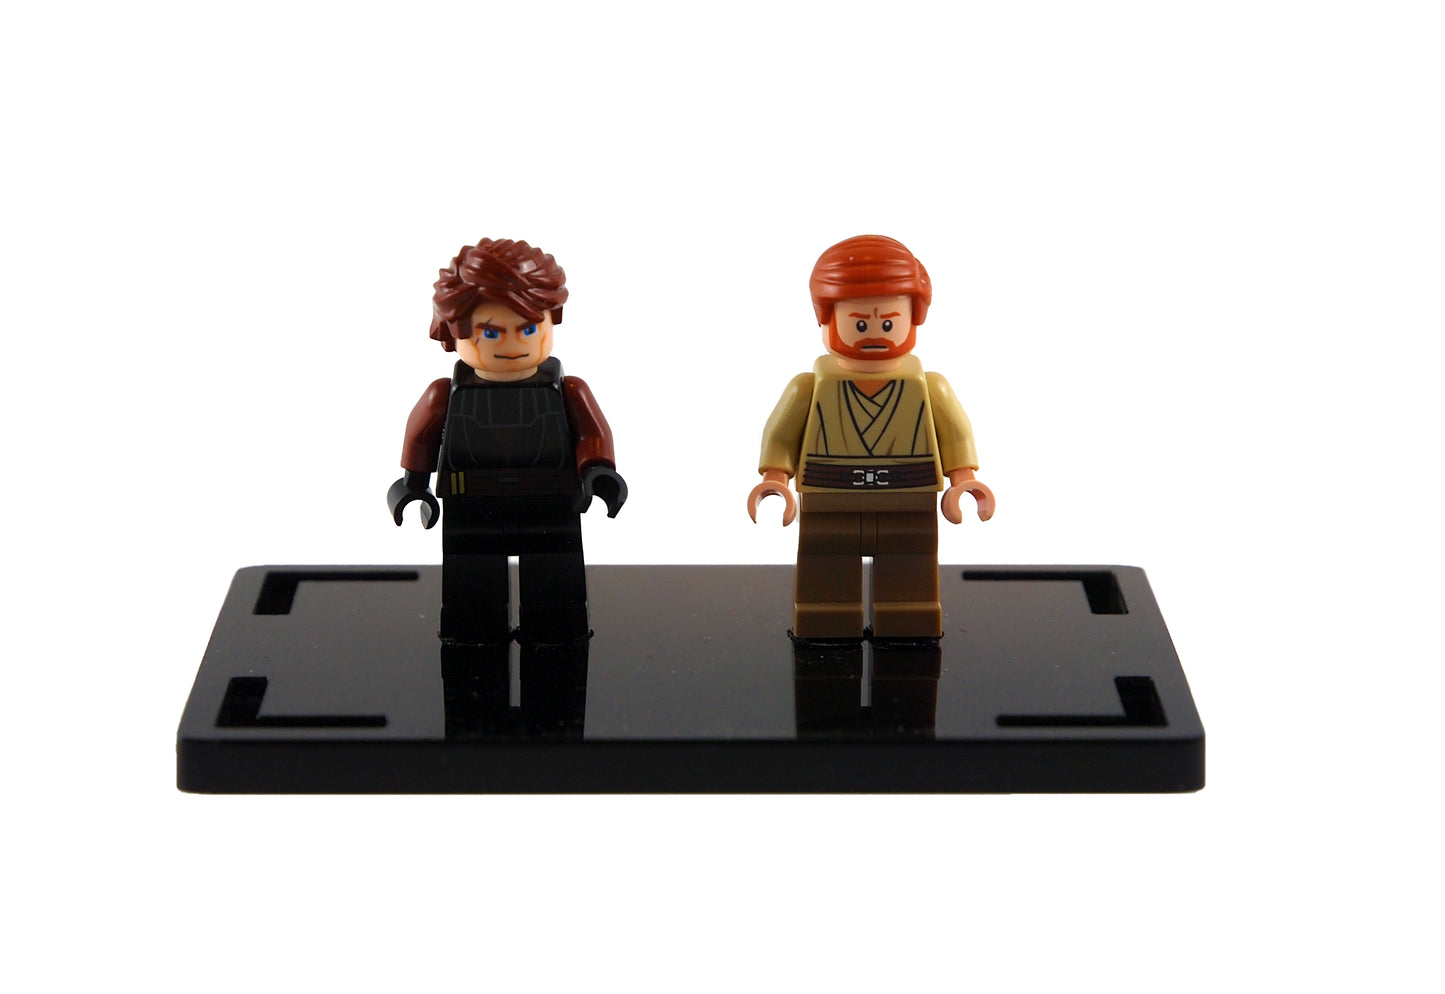 Display Case For Two LEGO Minifigures